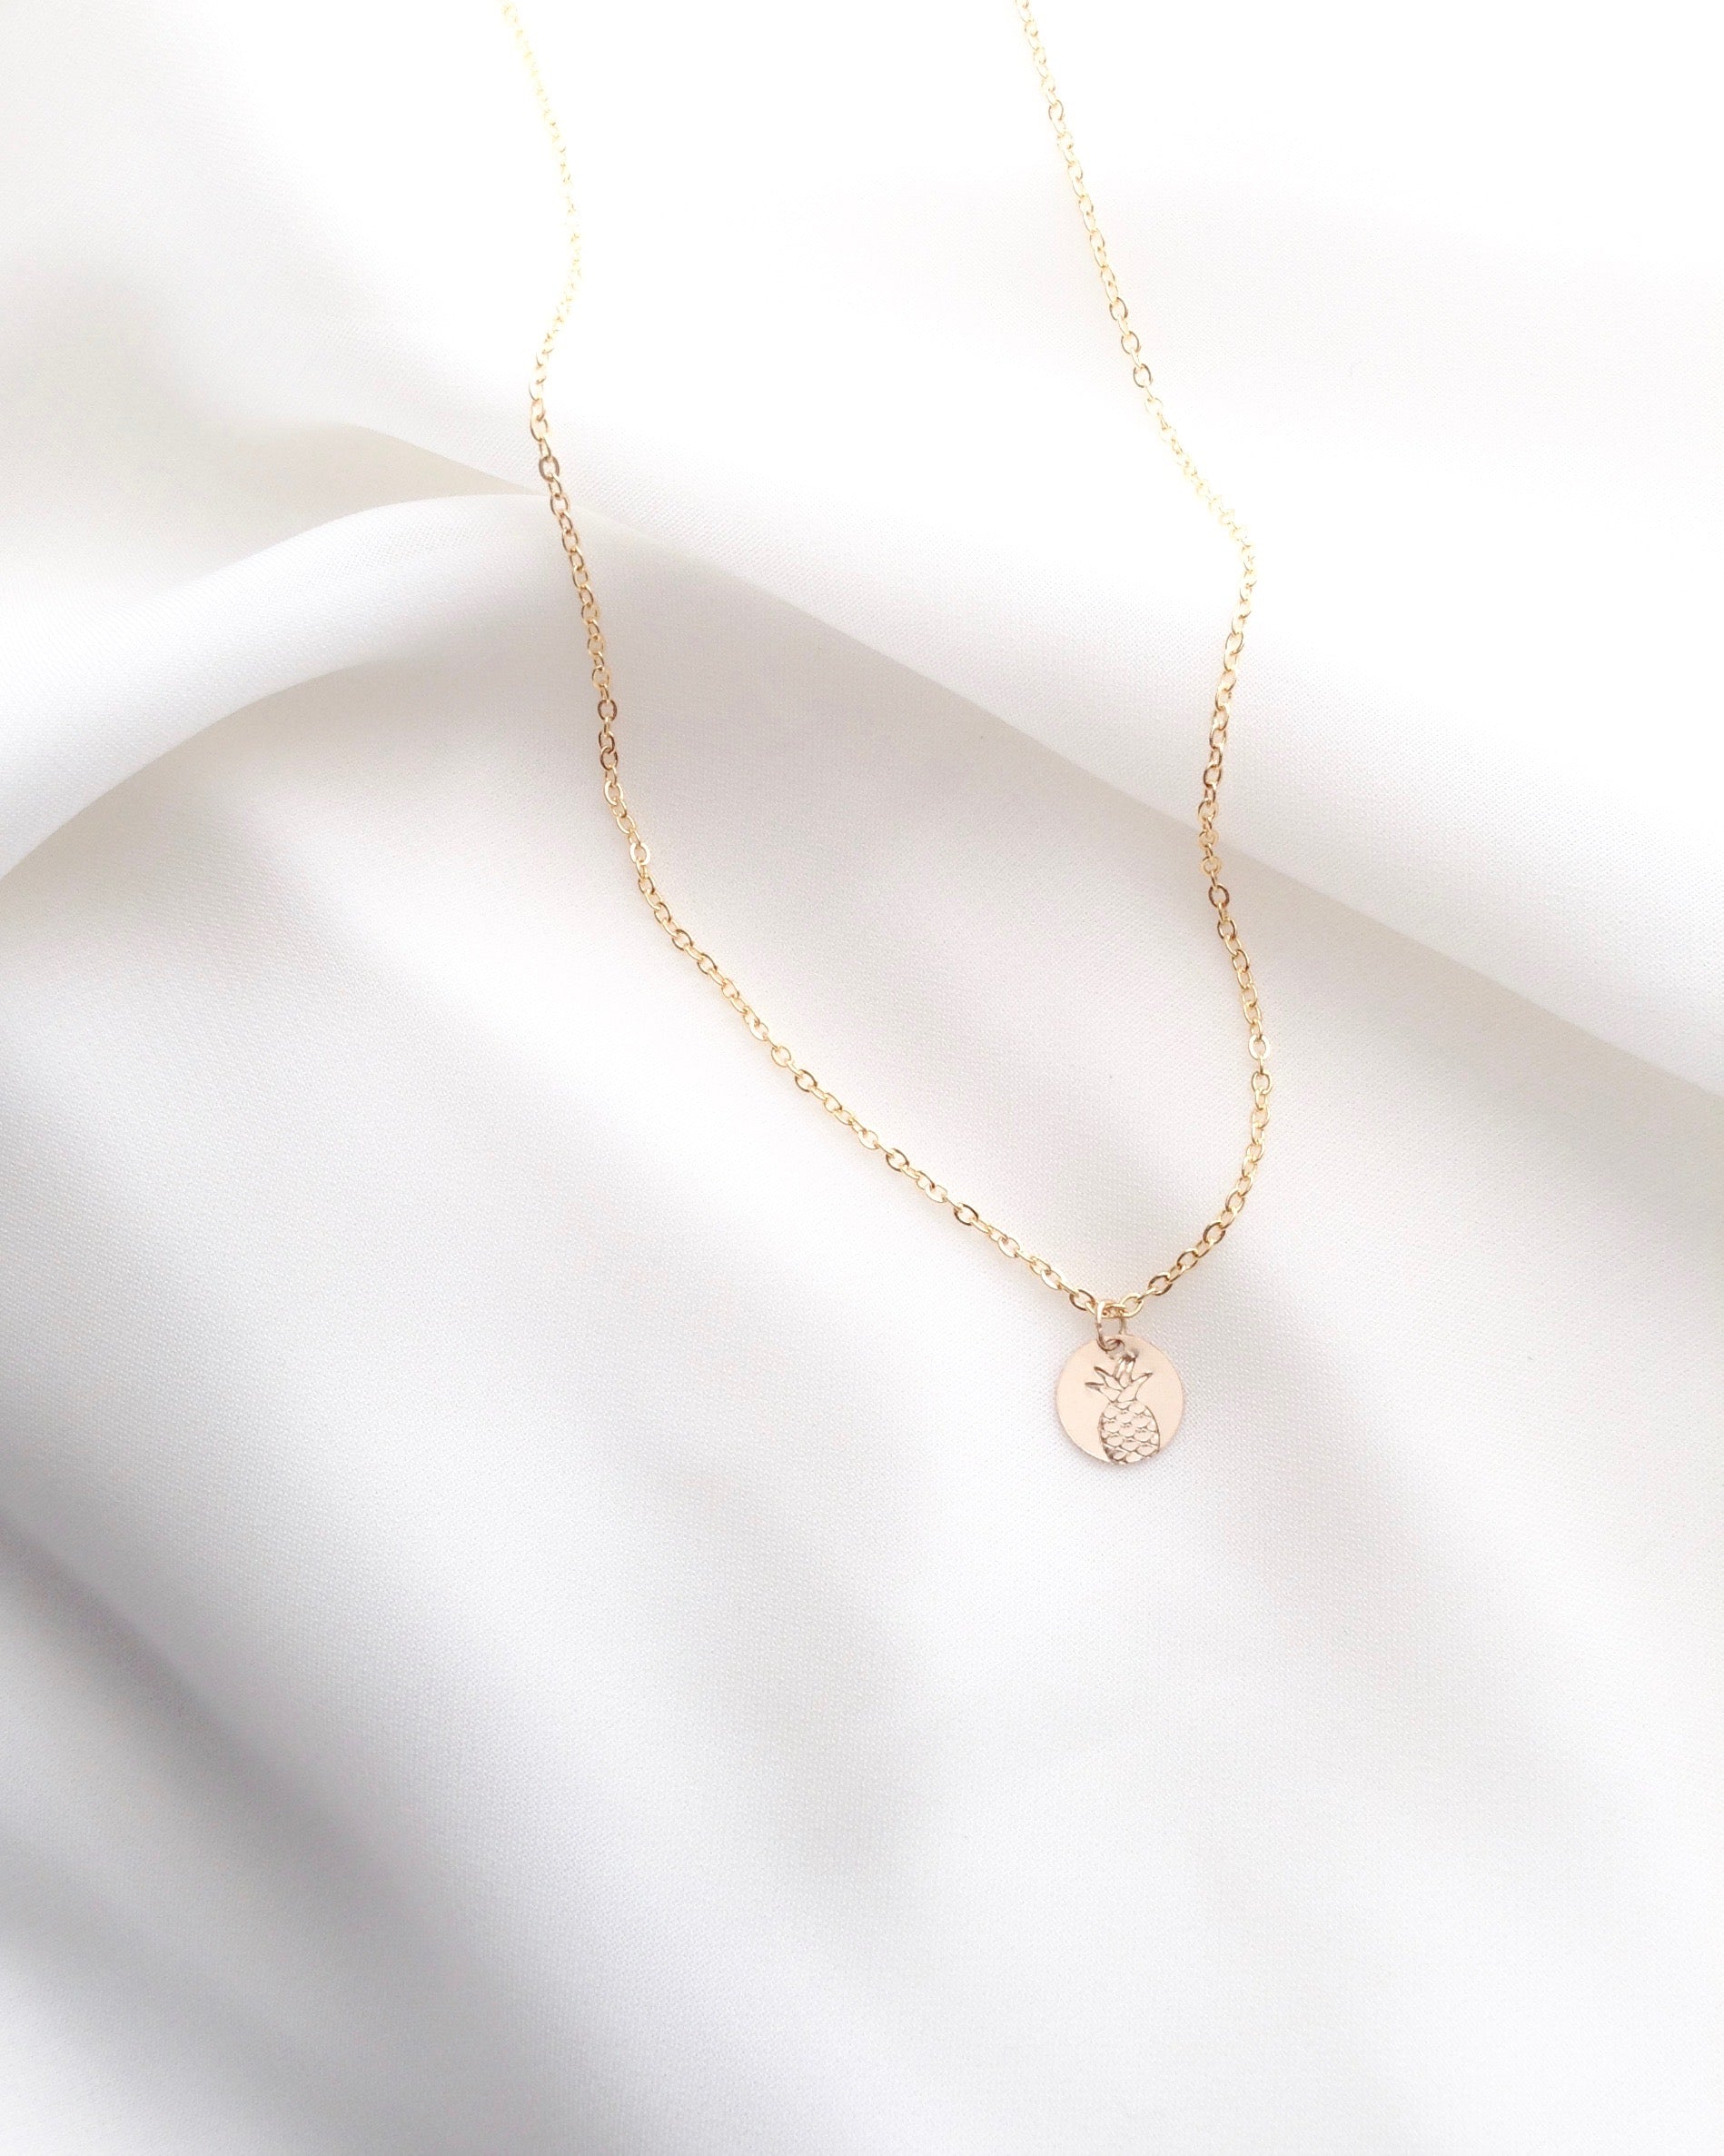 Dainty Pineapple Necklace | Simple Everyday Necklace in Gold Filled or Sterling Silver | IB Jewelry